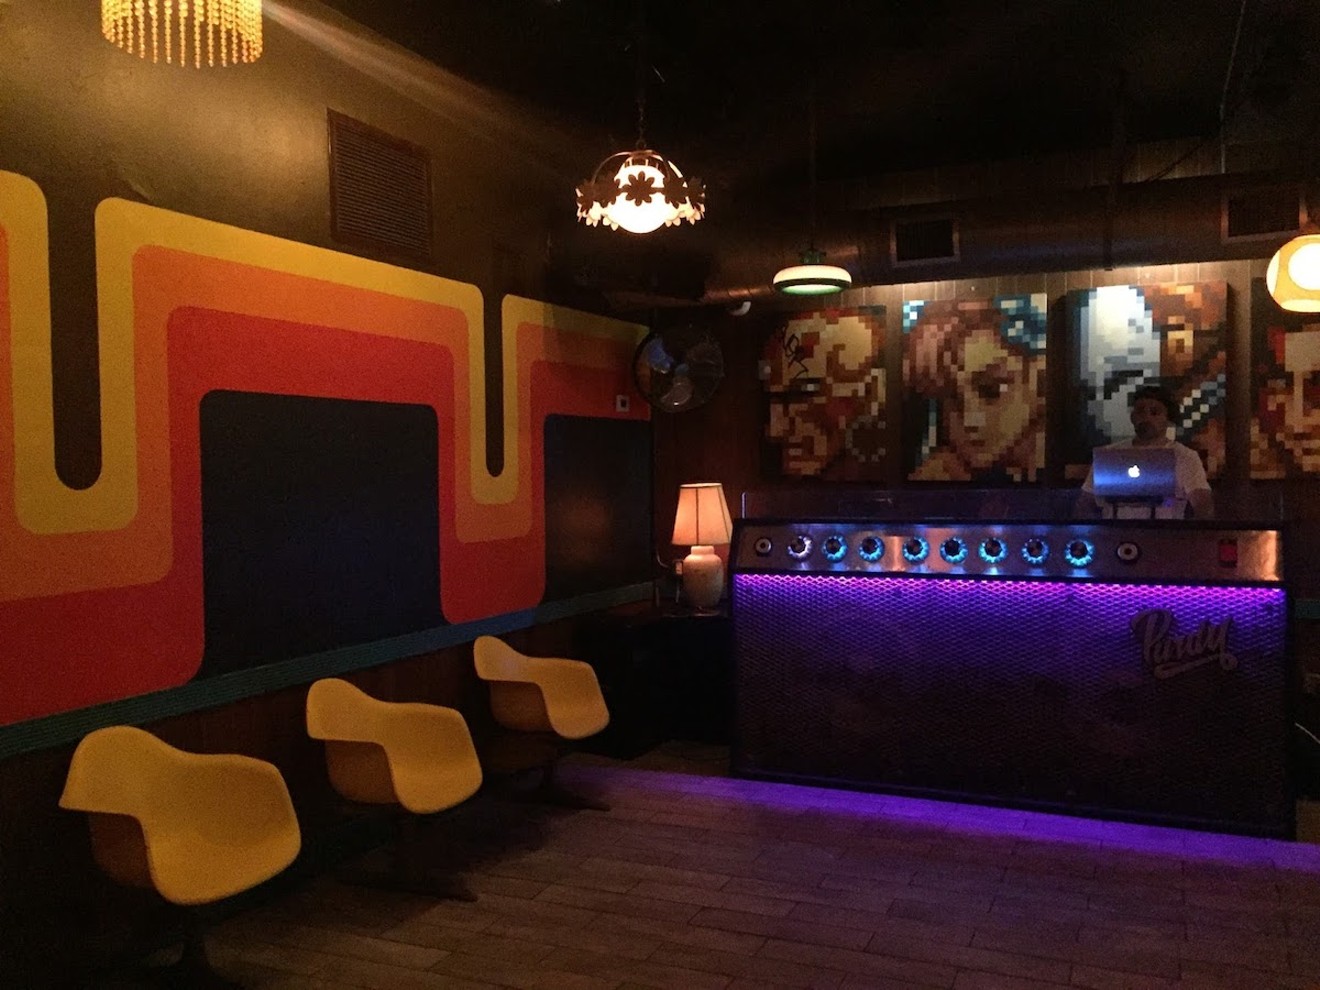 Purdy Lounge will close February 8, 2020, after a 20-year run.